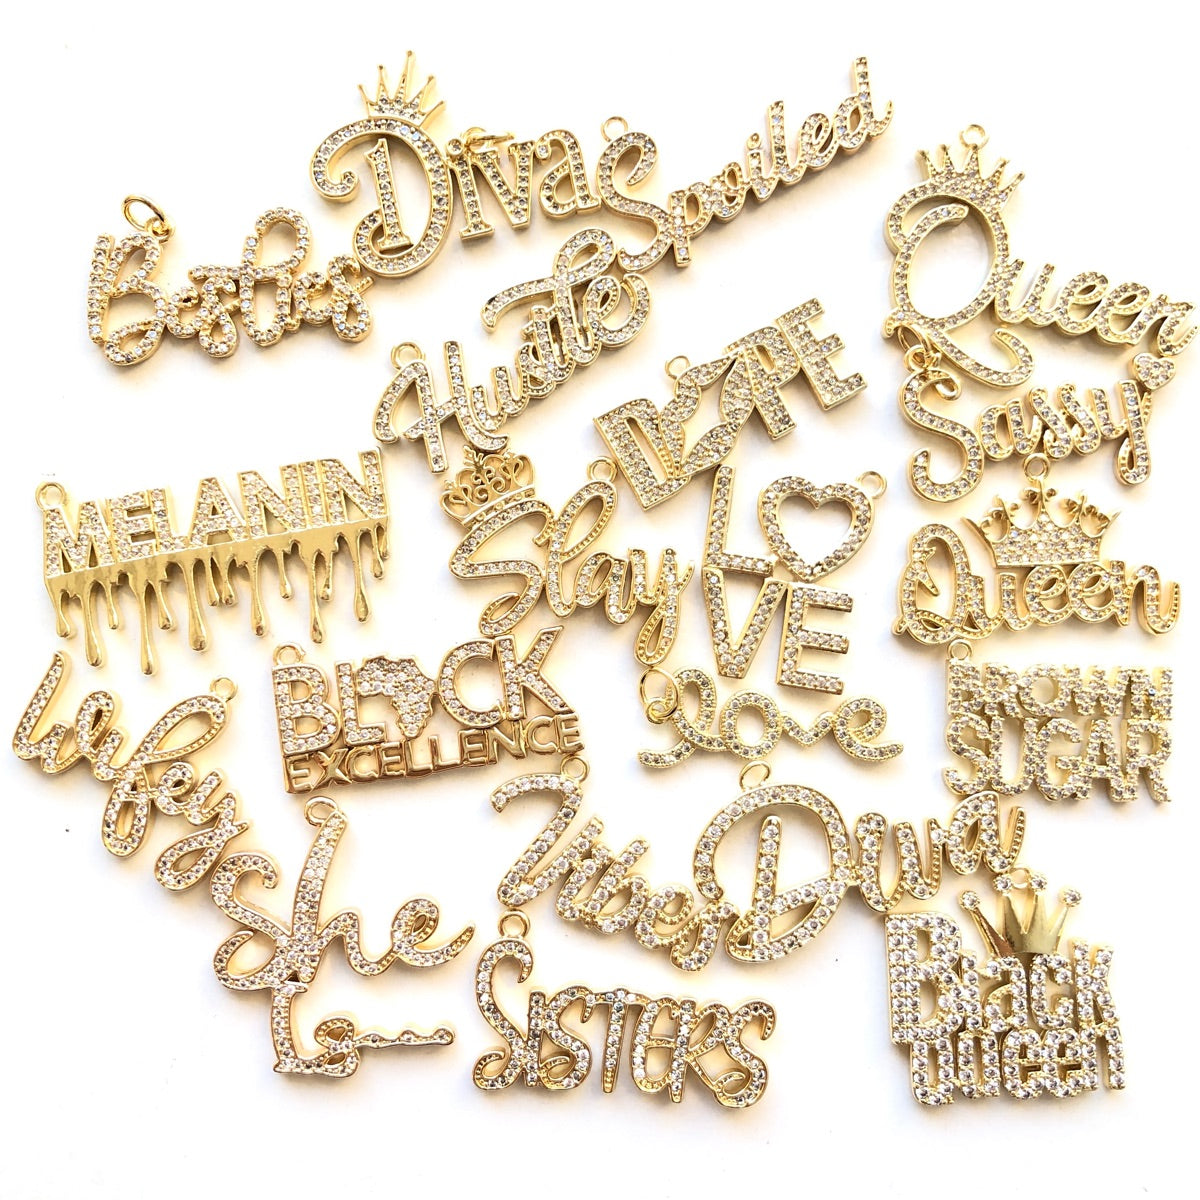 20pcs/lot Mix Diva Wifey Love Black Queen Slay... Word Charms Bundle Gold CZ Paved Charms Mix Charms On Sale Charms Beads Beyond